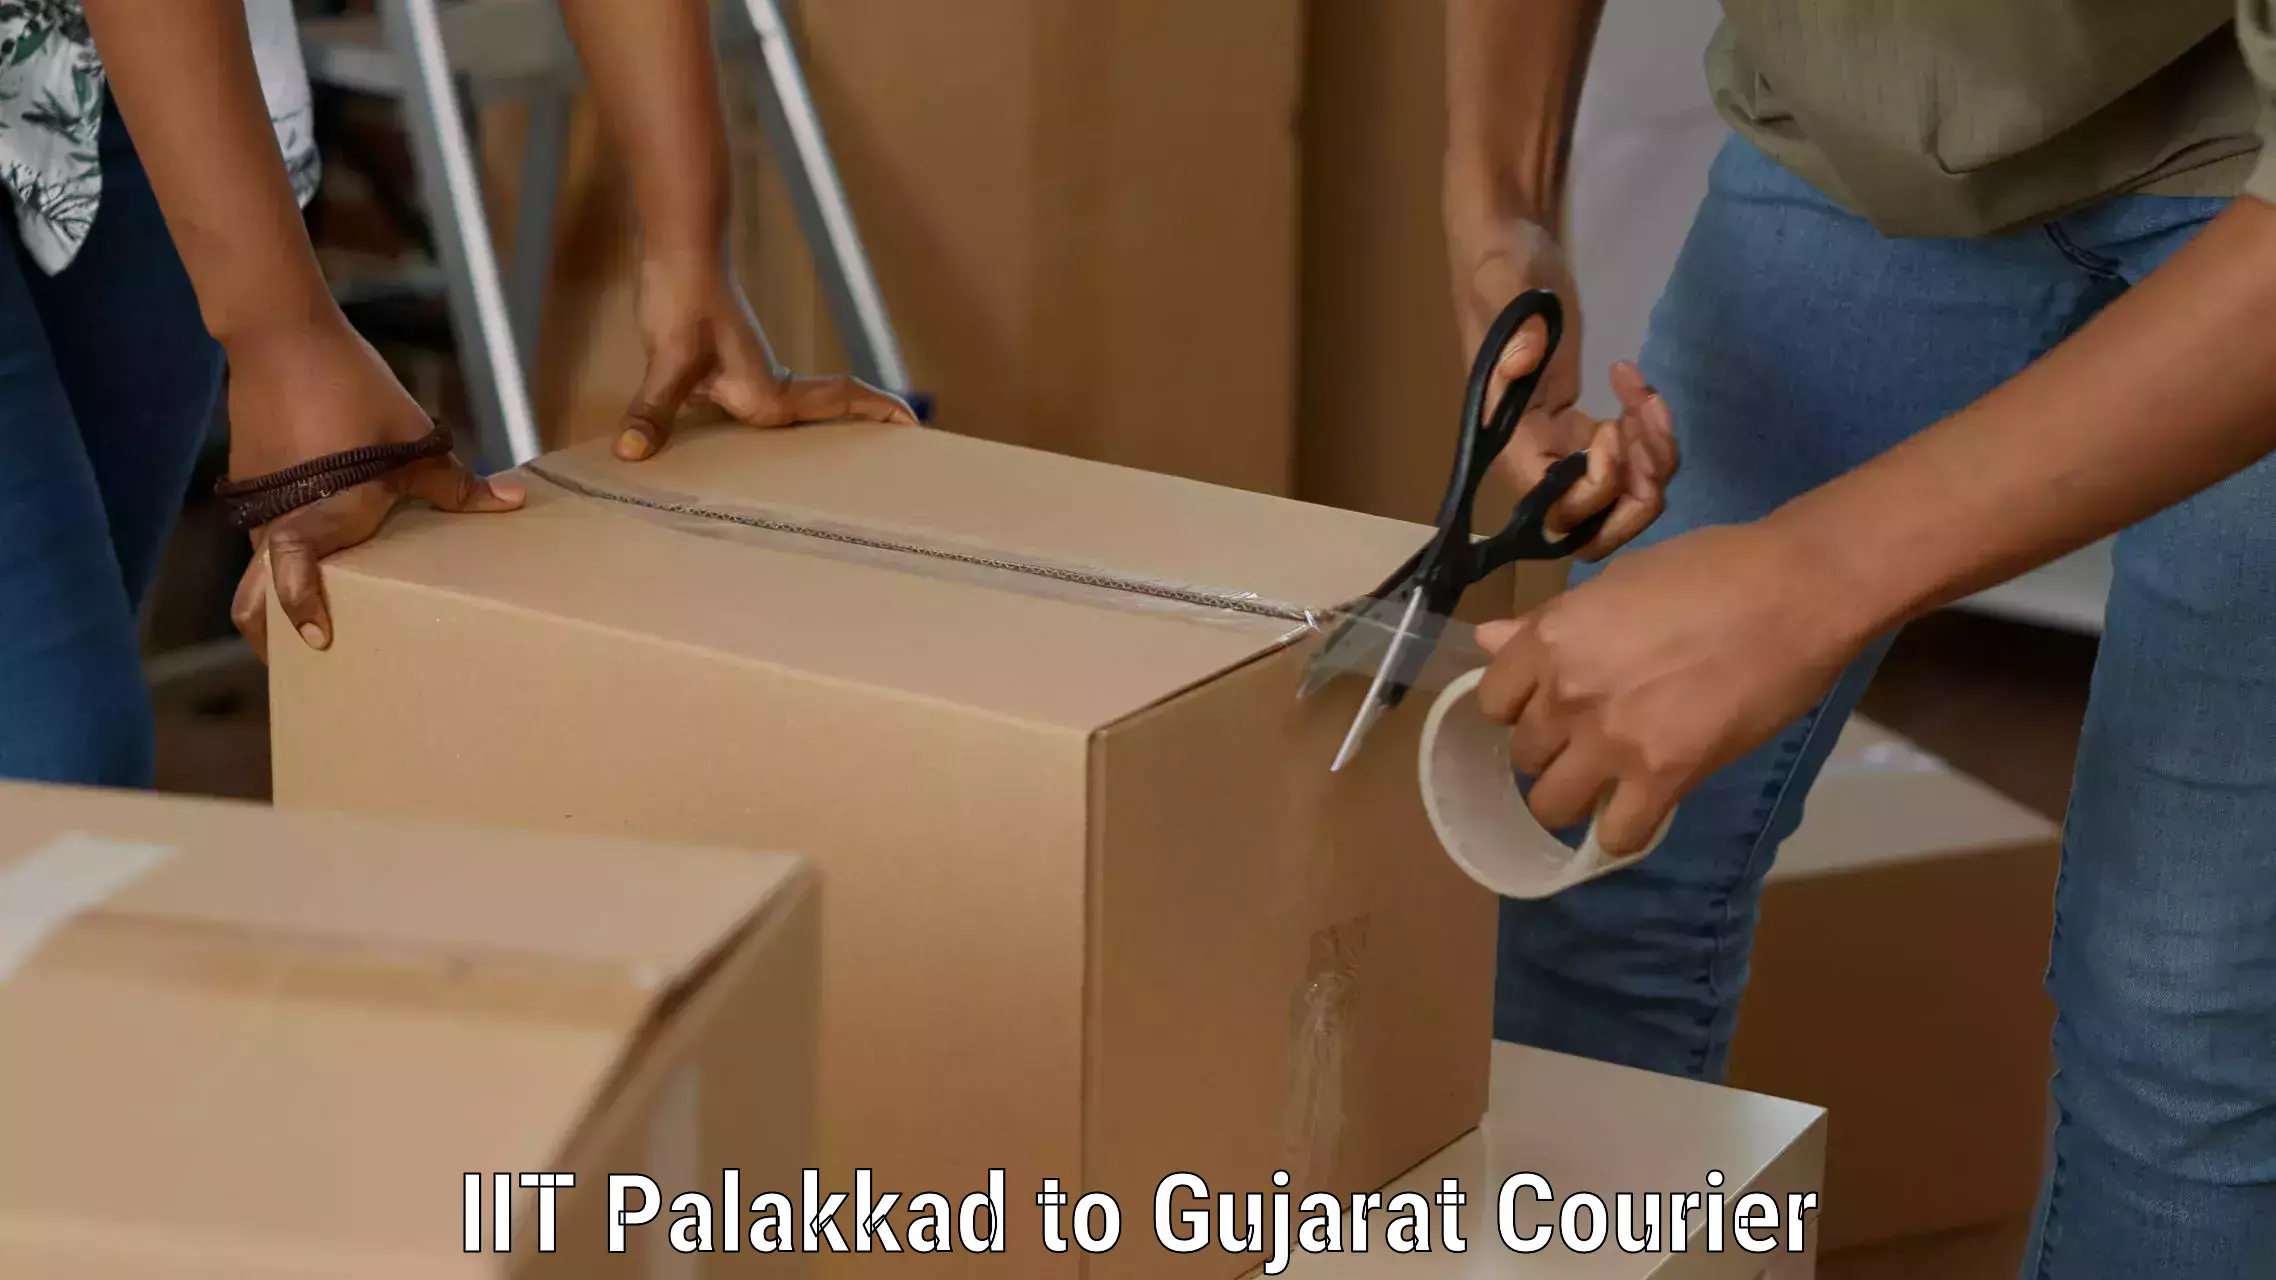 Professional courier services in IIT Palakkad to Anand